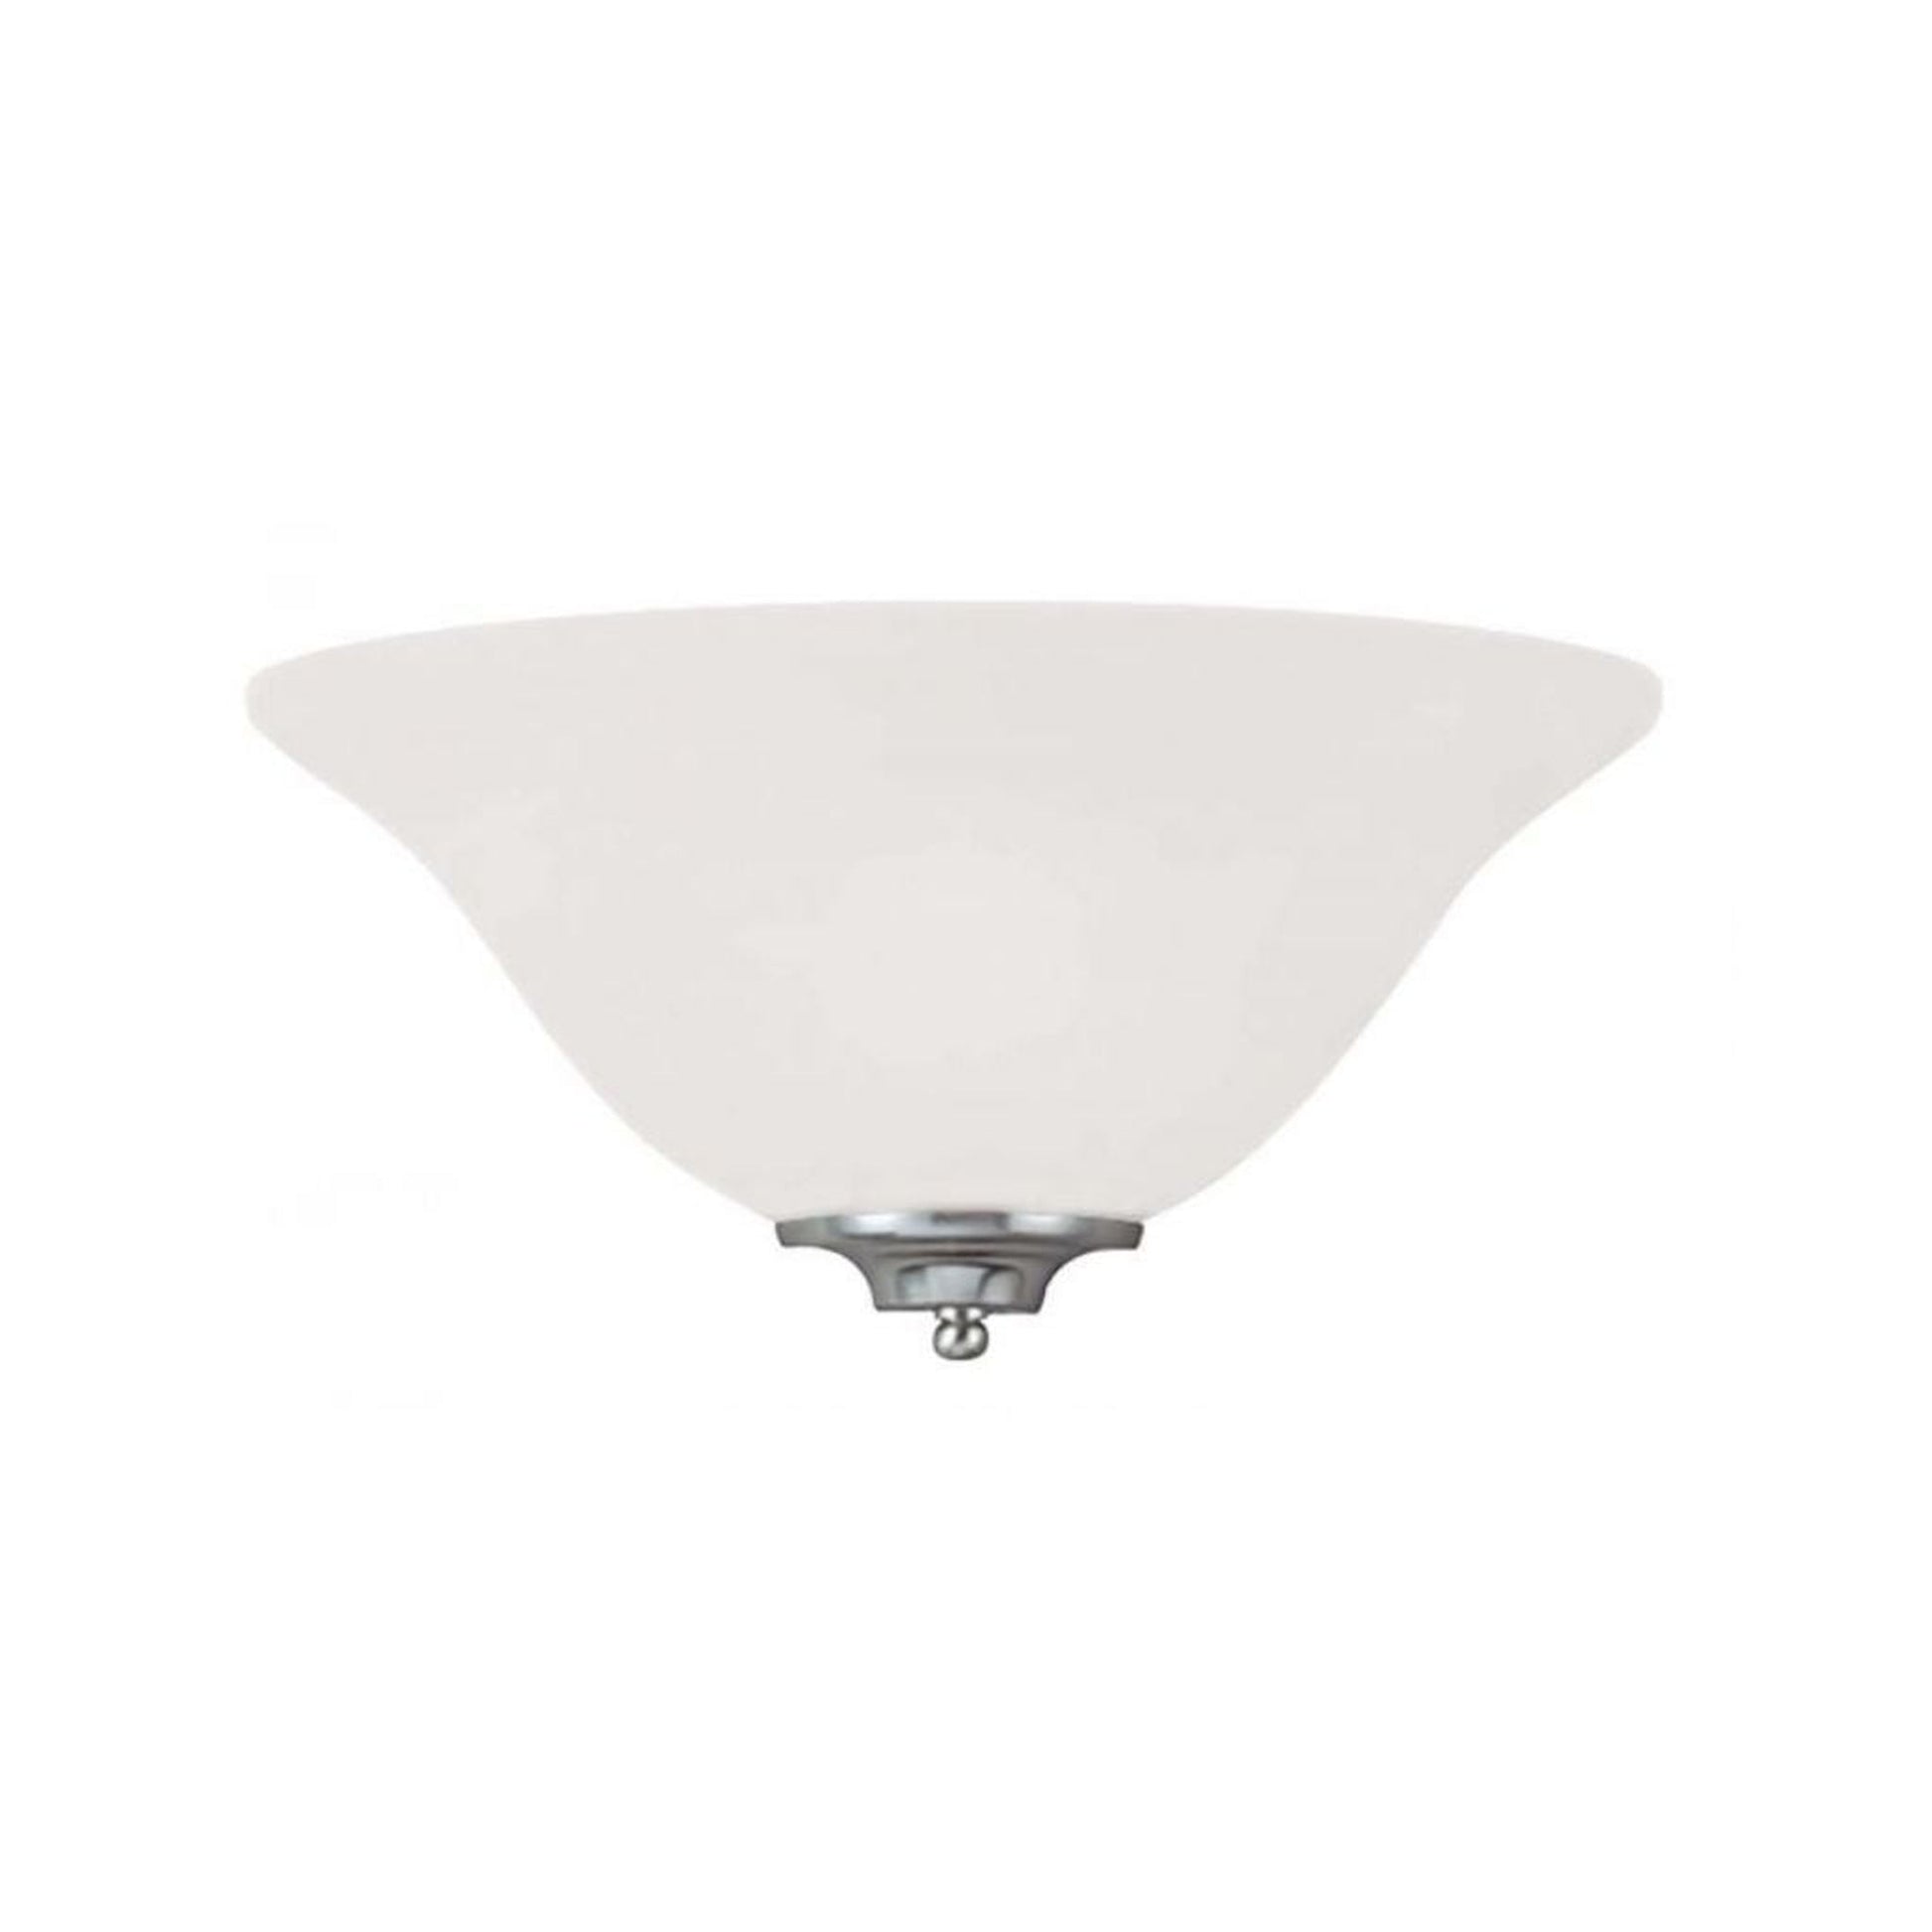 Craftmade Raleigh 7" x 13" 1-Light Satin Nickel Wall Sconce With Bowl White Frosted Glass Shade